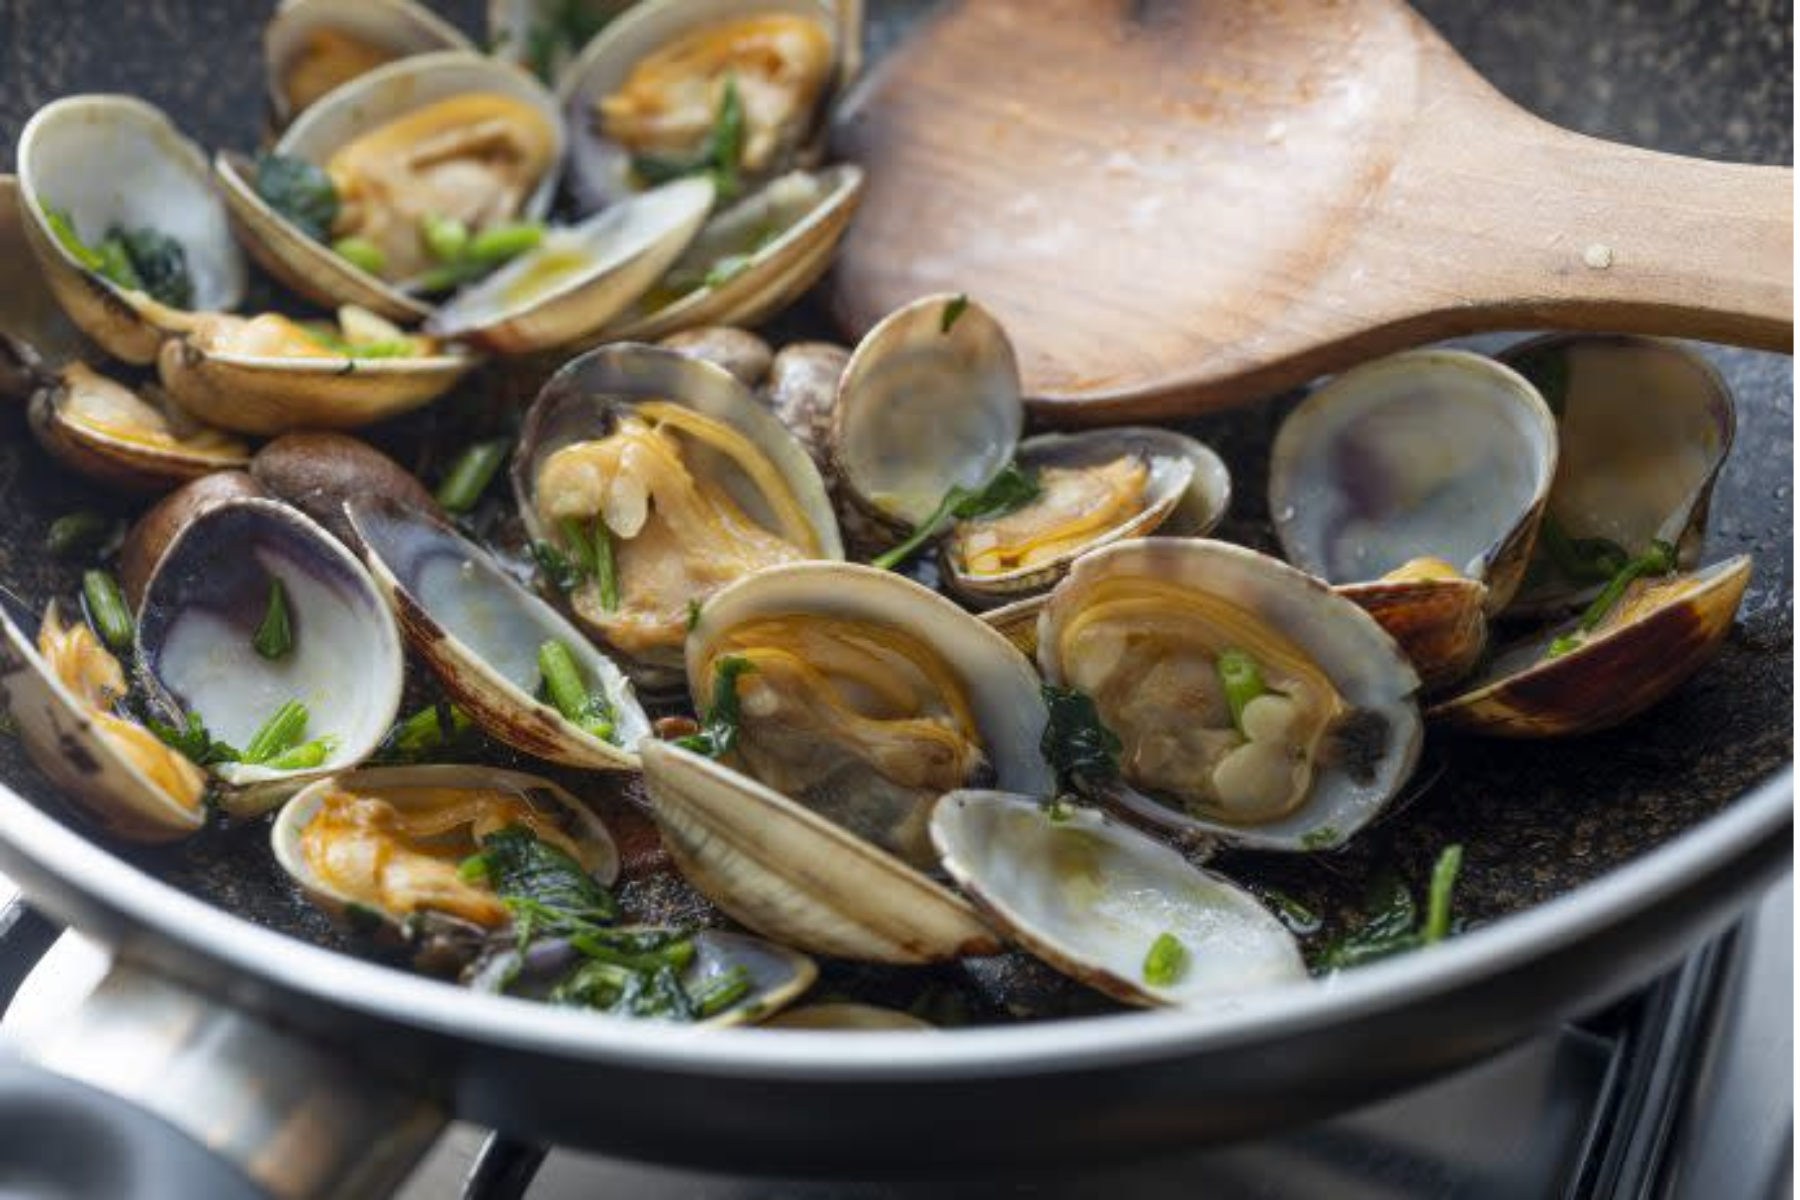 Tons of clams being cooked in a frying pan with a wooden ladle